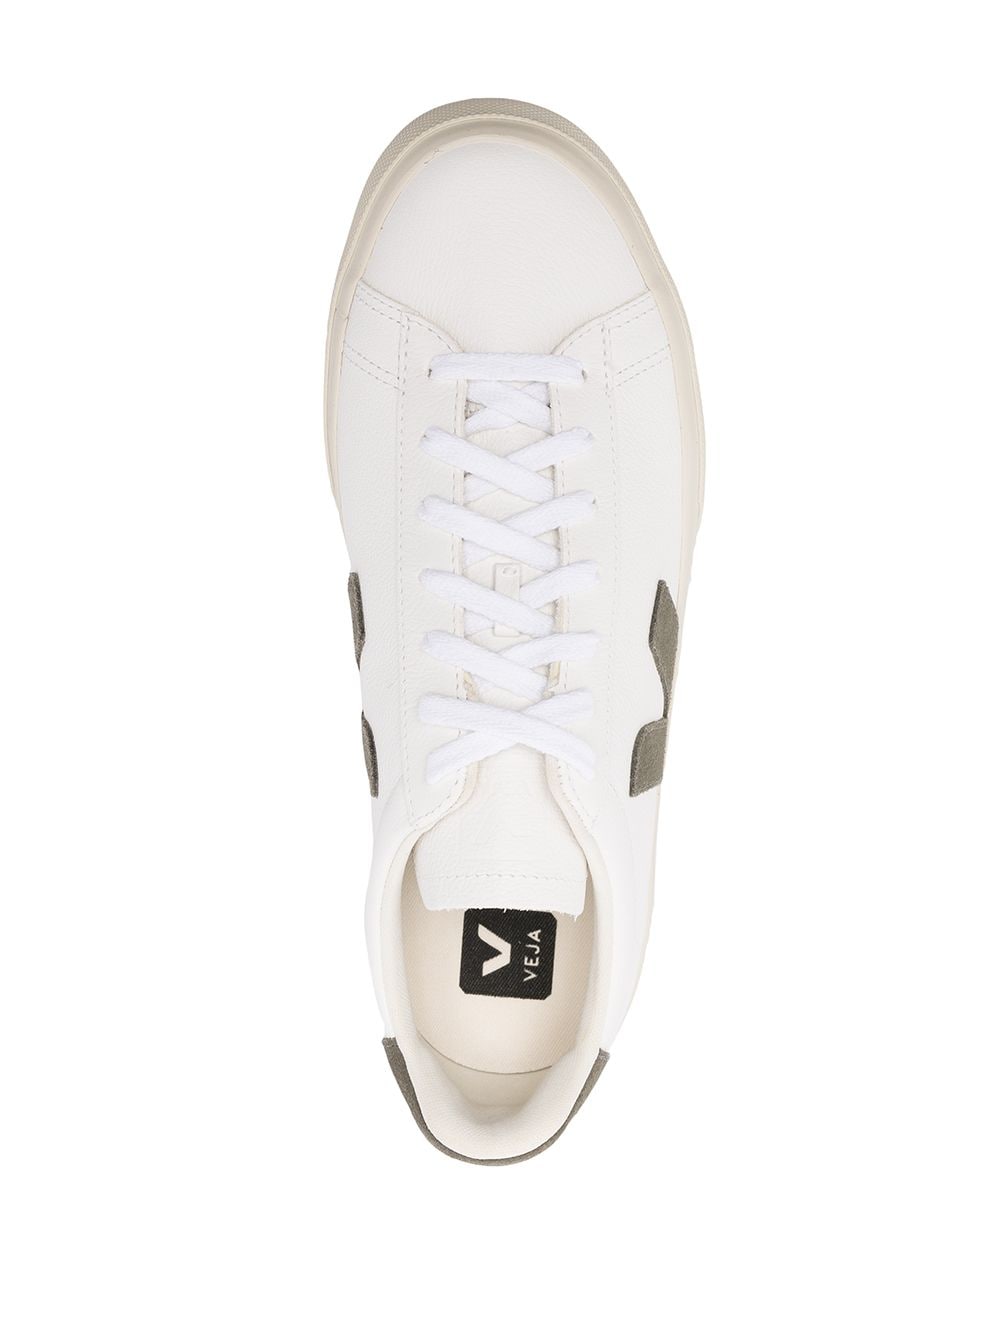 Campo leather sneakers<BR/><BR/><BR/>